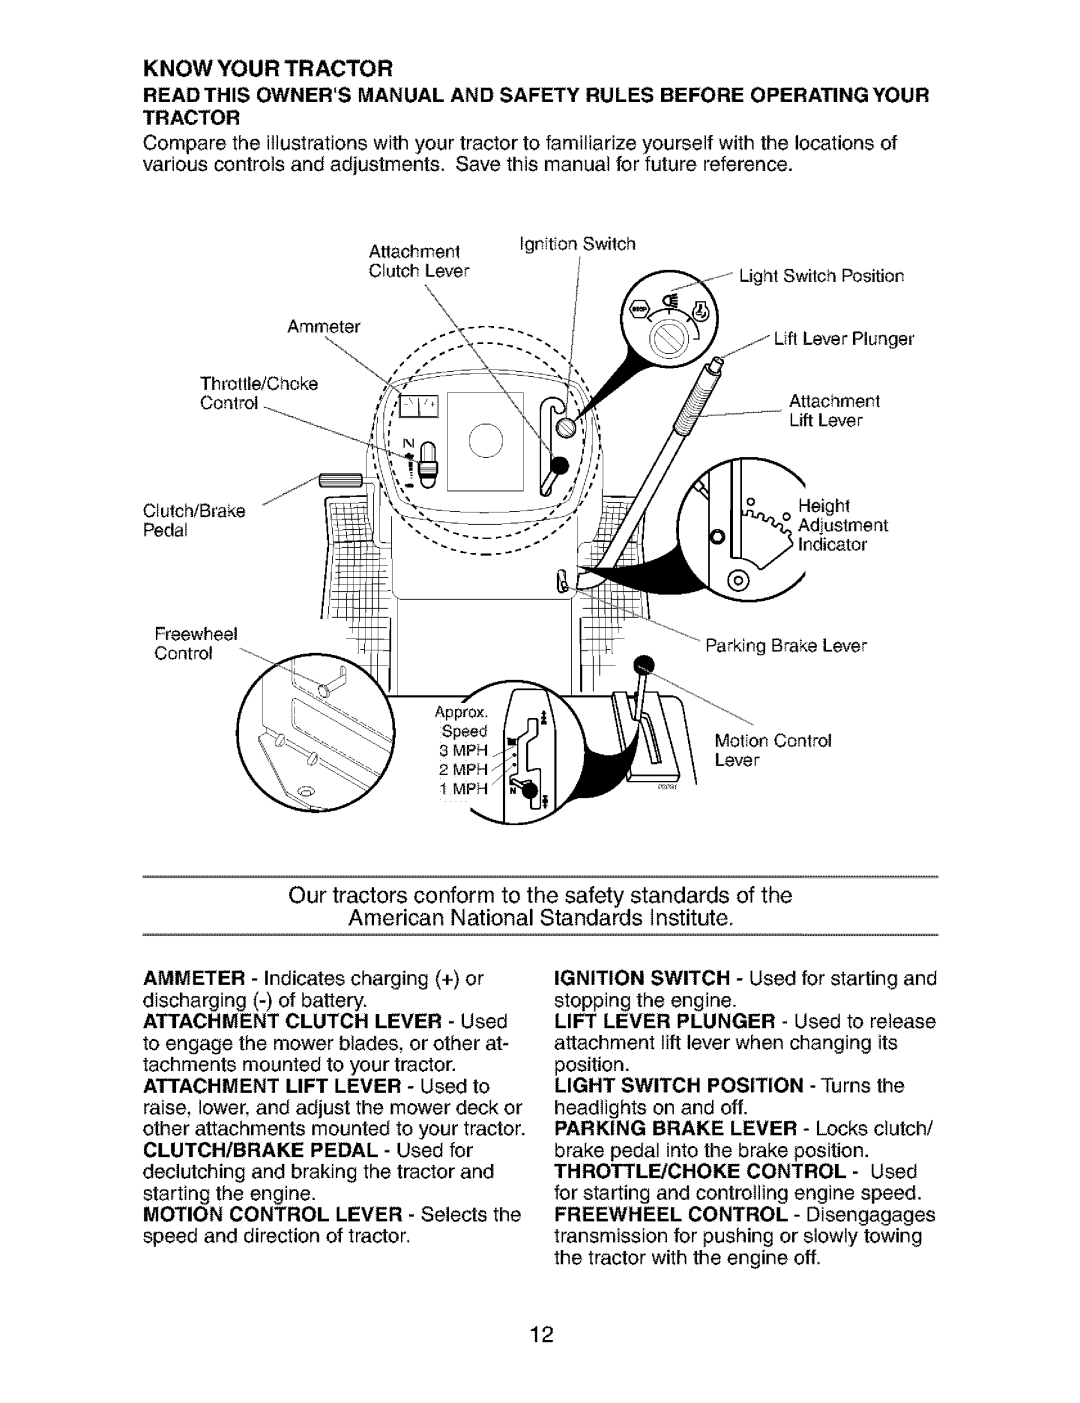 Craftsman 917.273823 owner manual American National Standards Institute, Know Your Tractor, Lever 